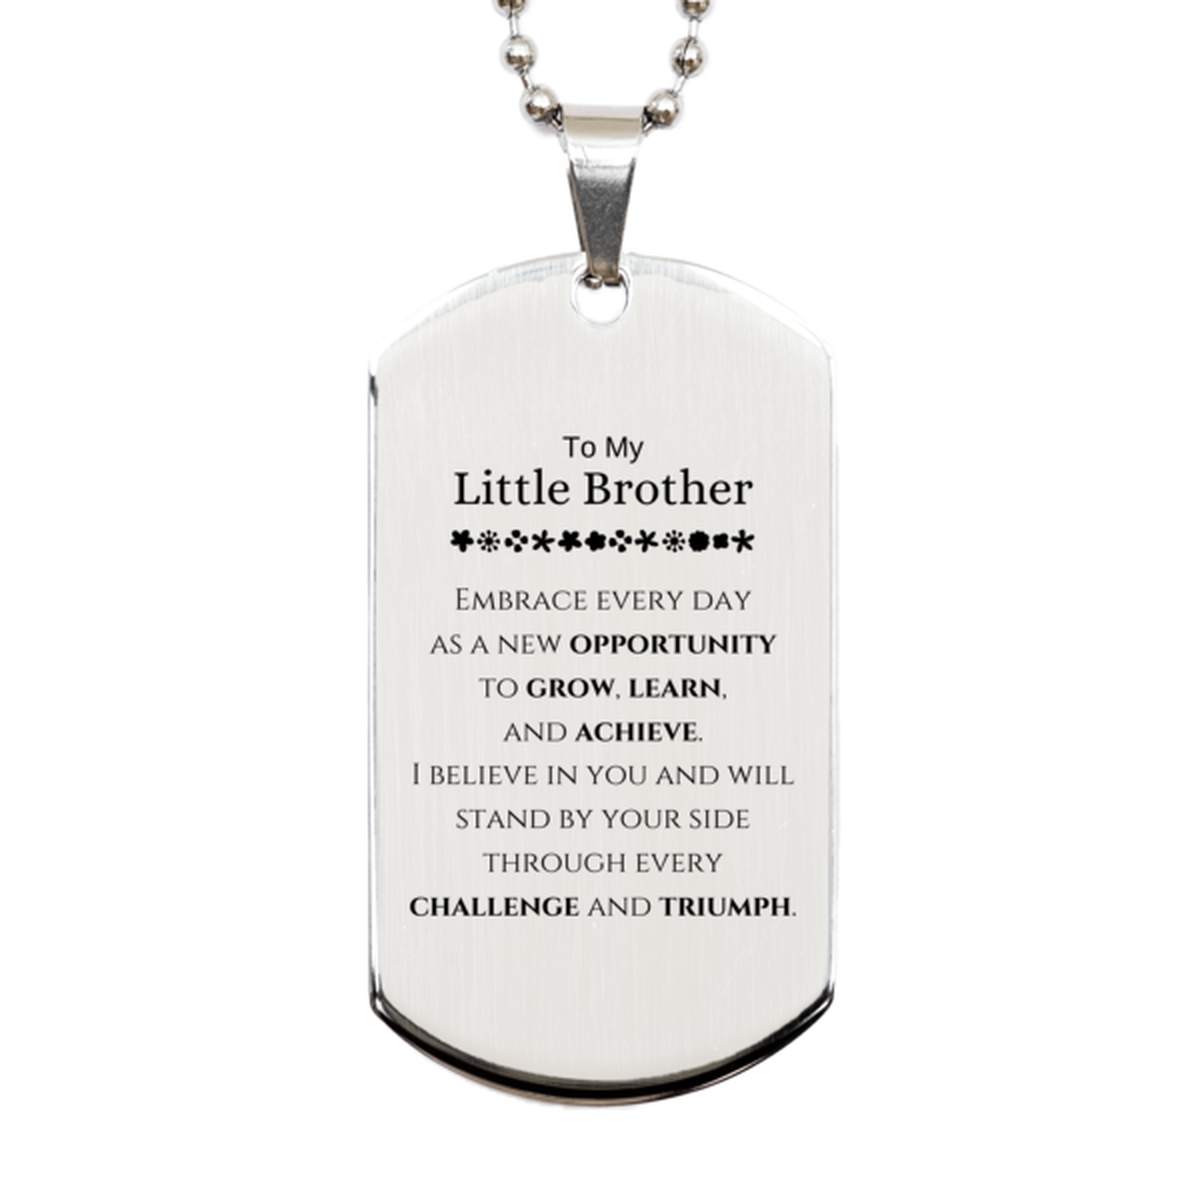 To My Little Brother Gifts, I believe in you and will stand by your side, Inspirational Silver Dog Tag For Little Brother, Birthday Christmas Motivational Little Brother Gifts